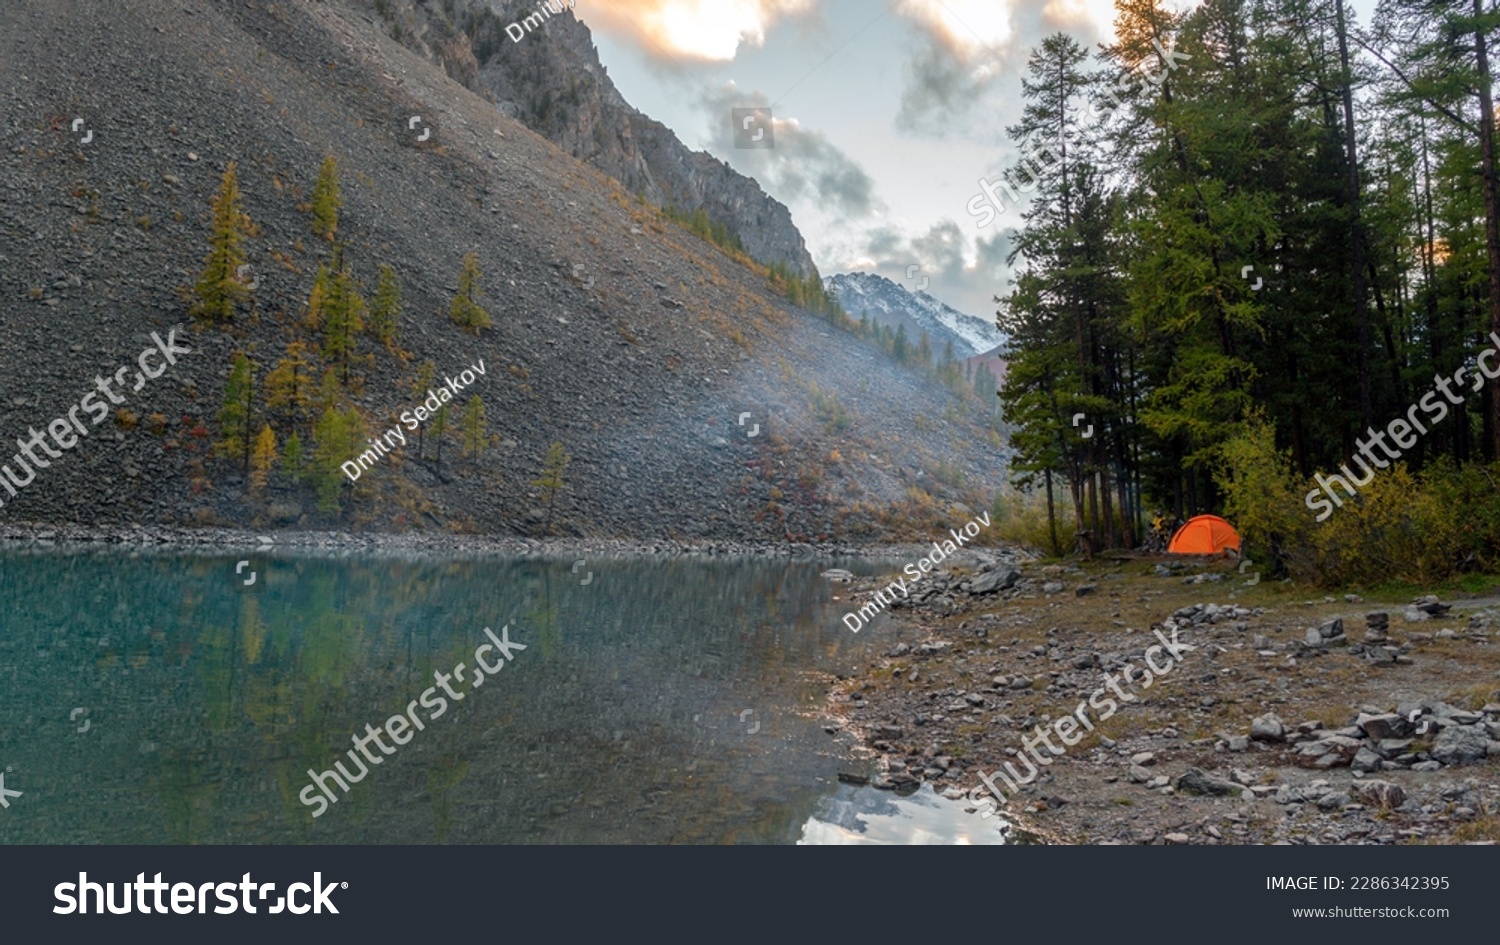 An orange tourist tent stands on the shore of the alpine lake Shavlinskoye near stone cliffs with smoke from a fire in Altai during the day. #2286342395